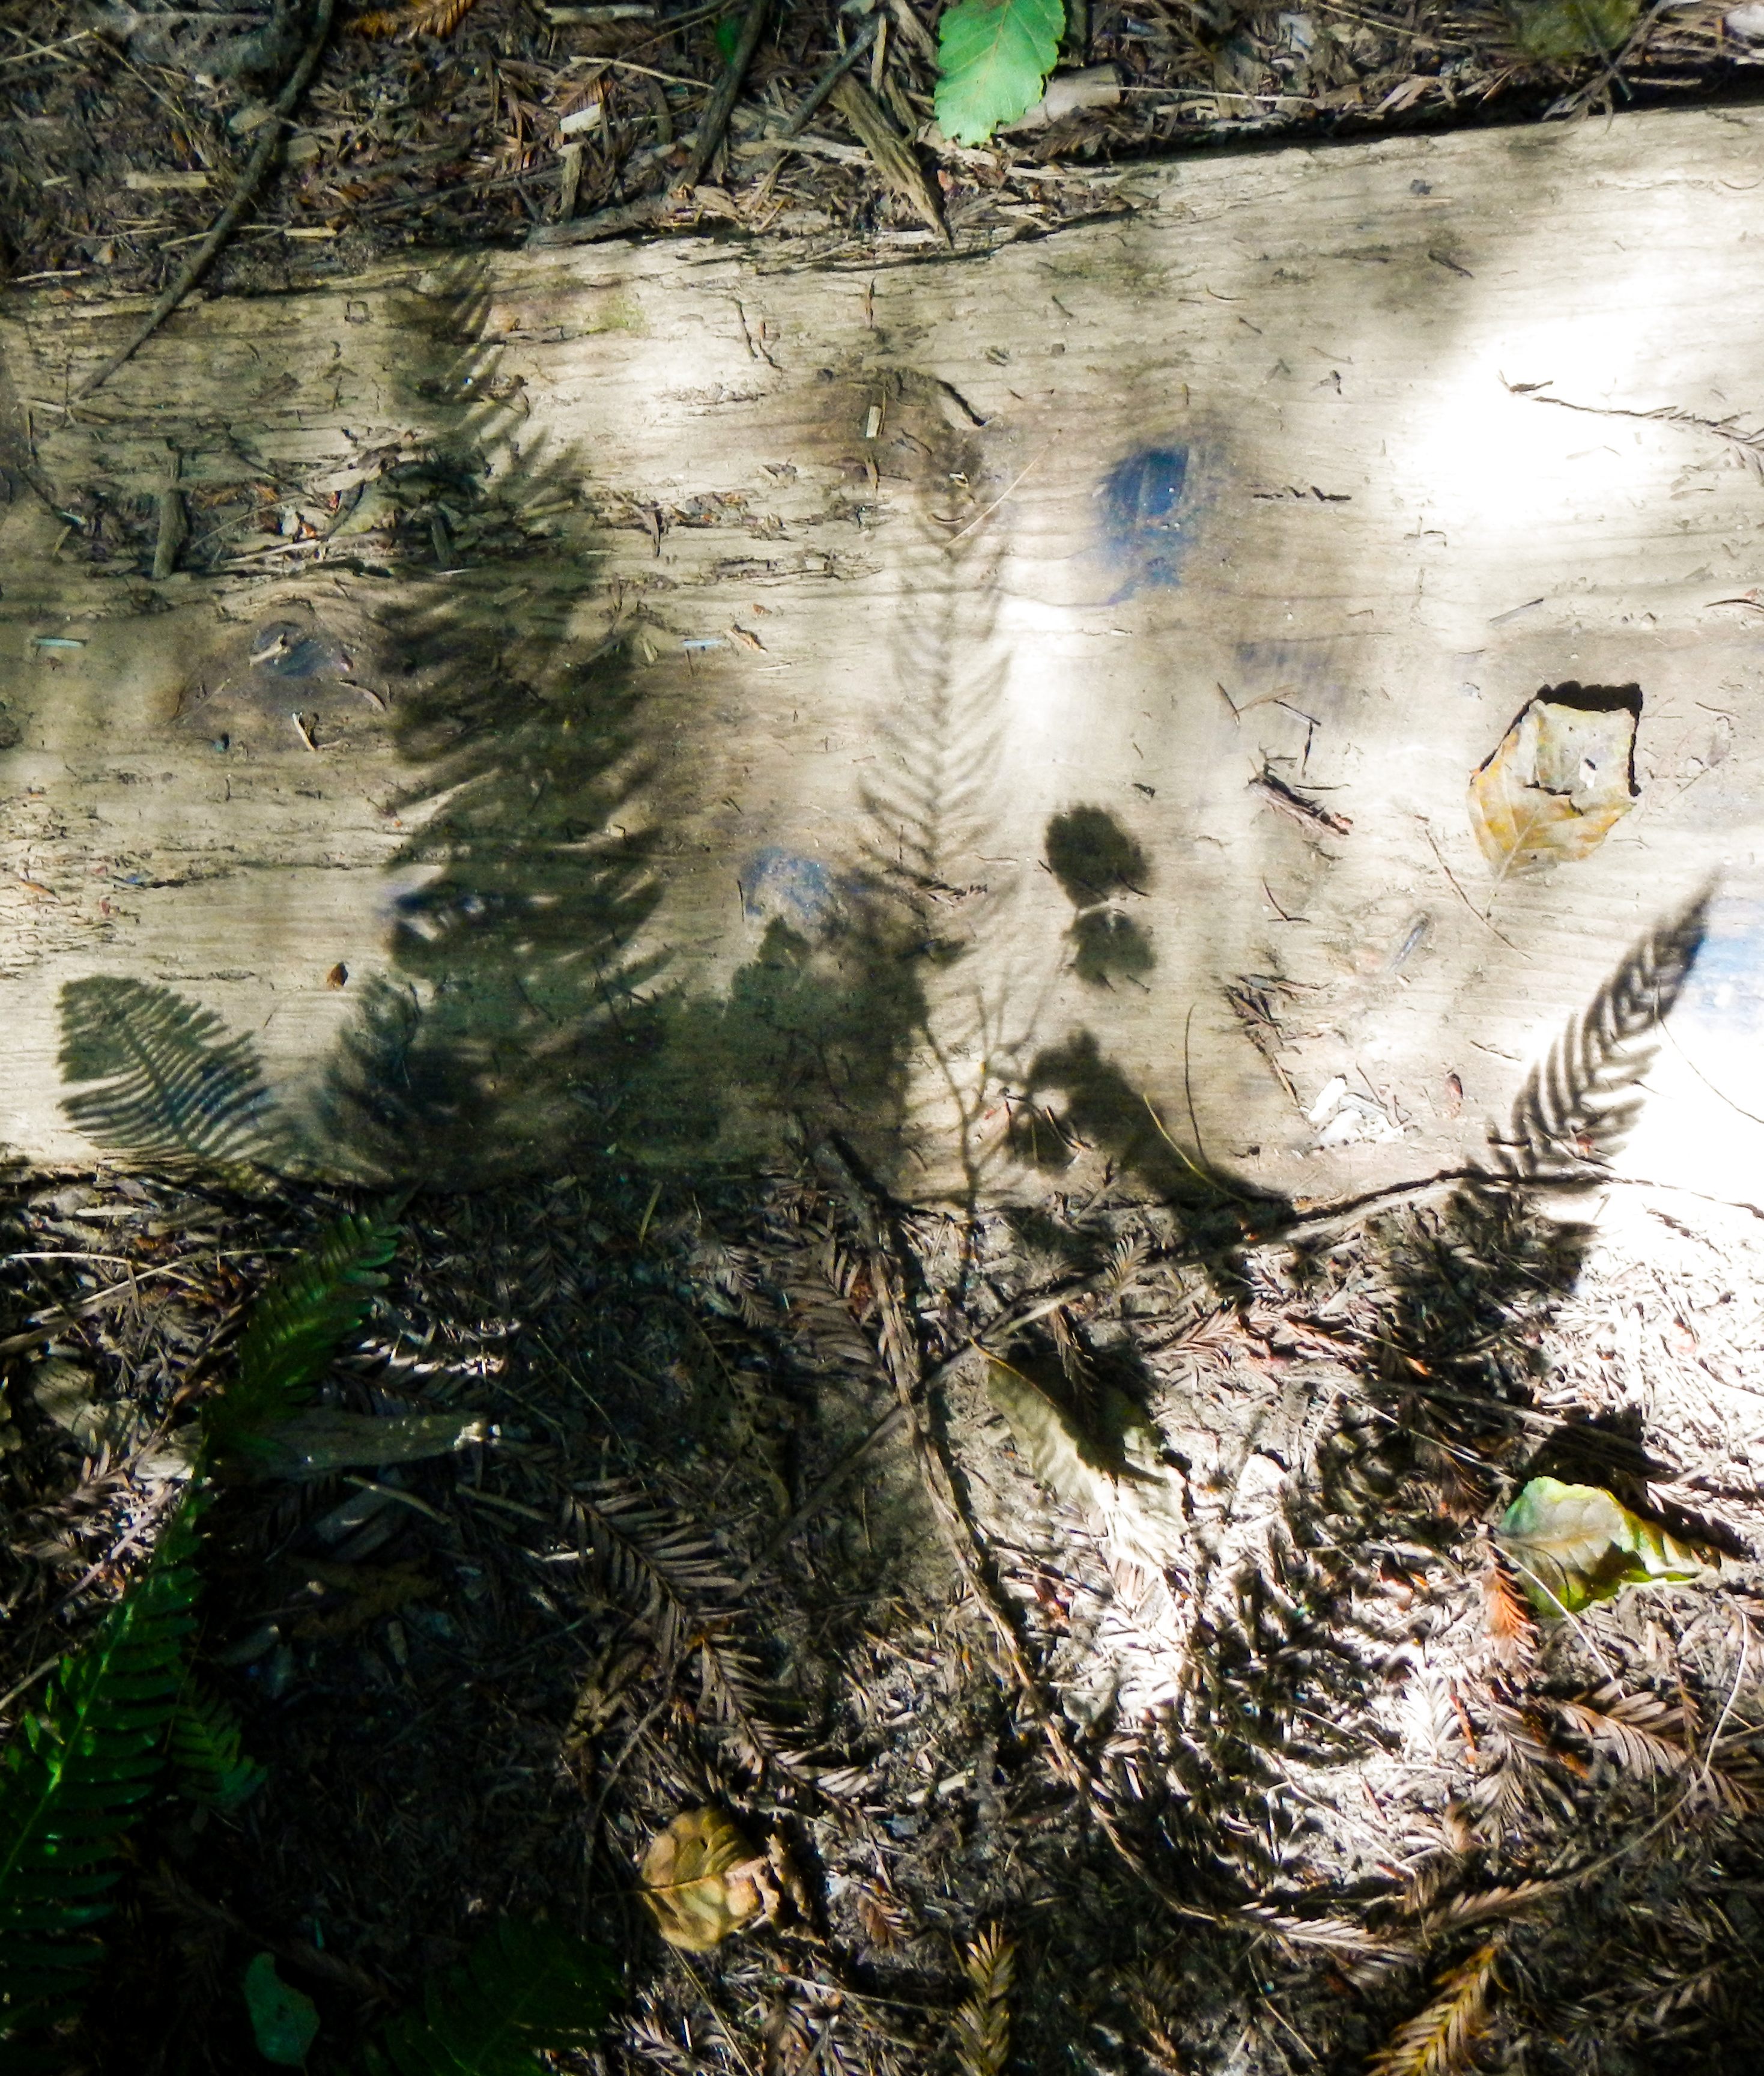 shadows from ferns cast on a fallen log in the forest